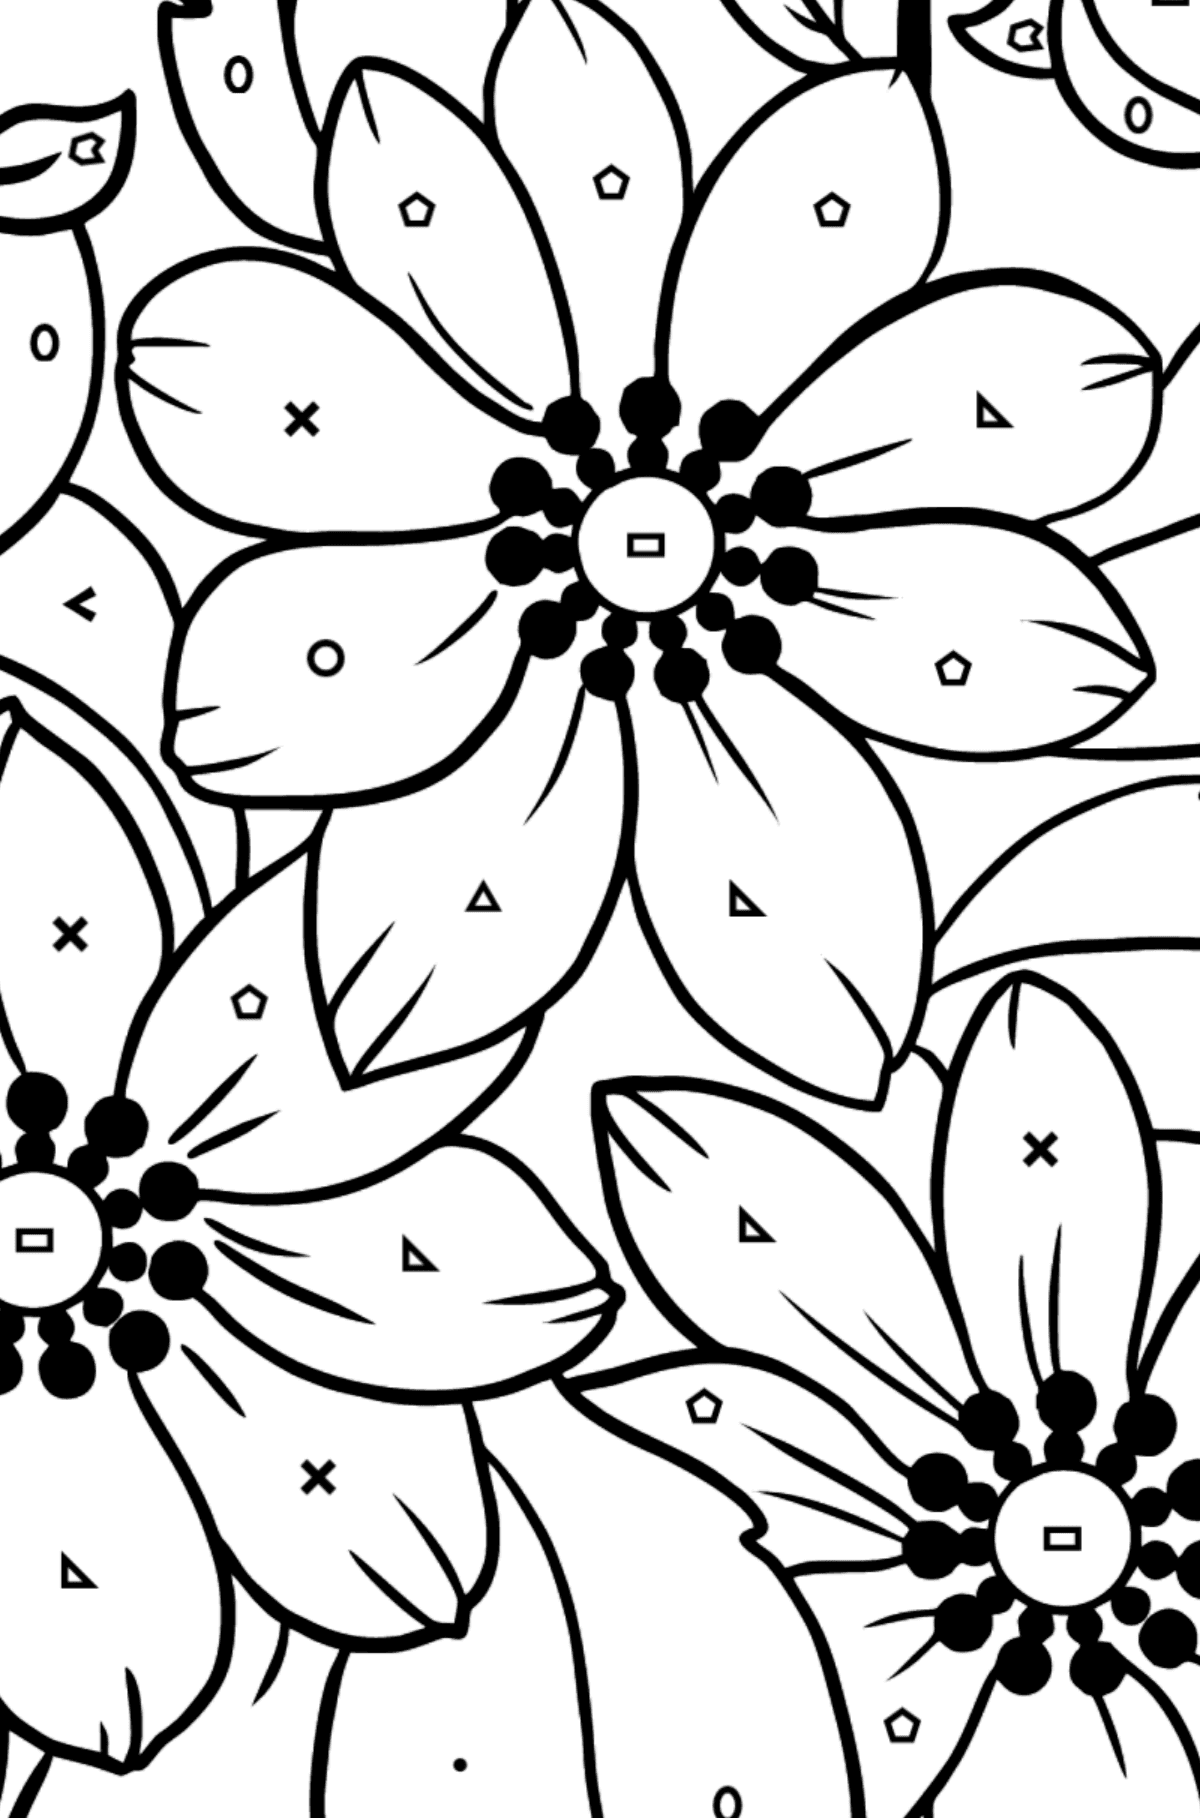 Flower Coloring Page - Anemone - Coloring by Symbols and Geometric Shapes for Kids